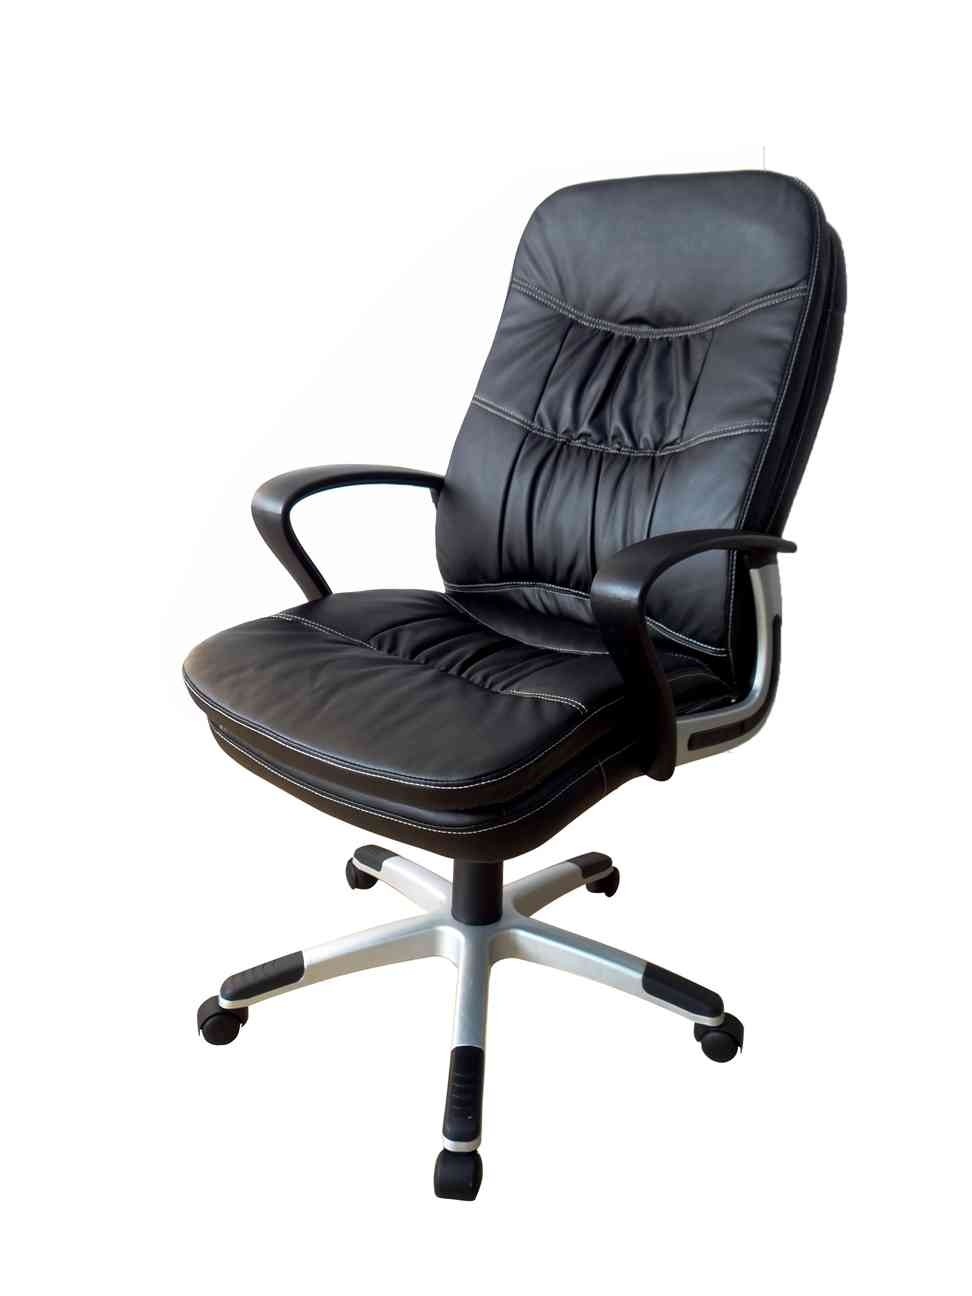 Office, Executive, Leader Chair With Bounded Leather And Adjustable Height- 10614